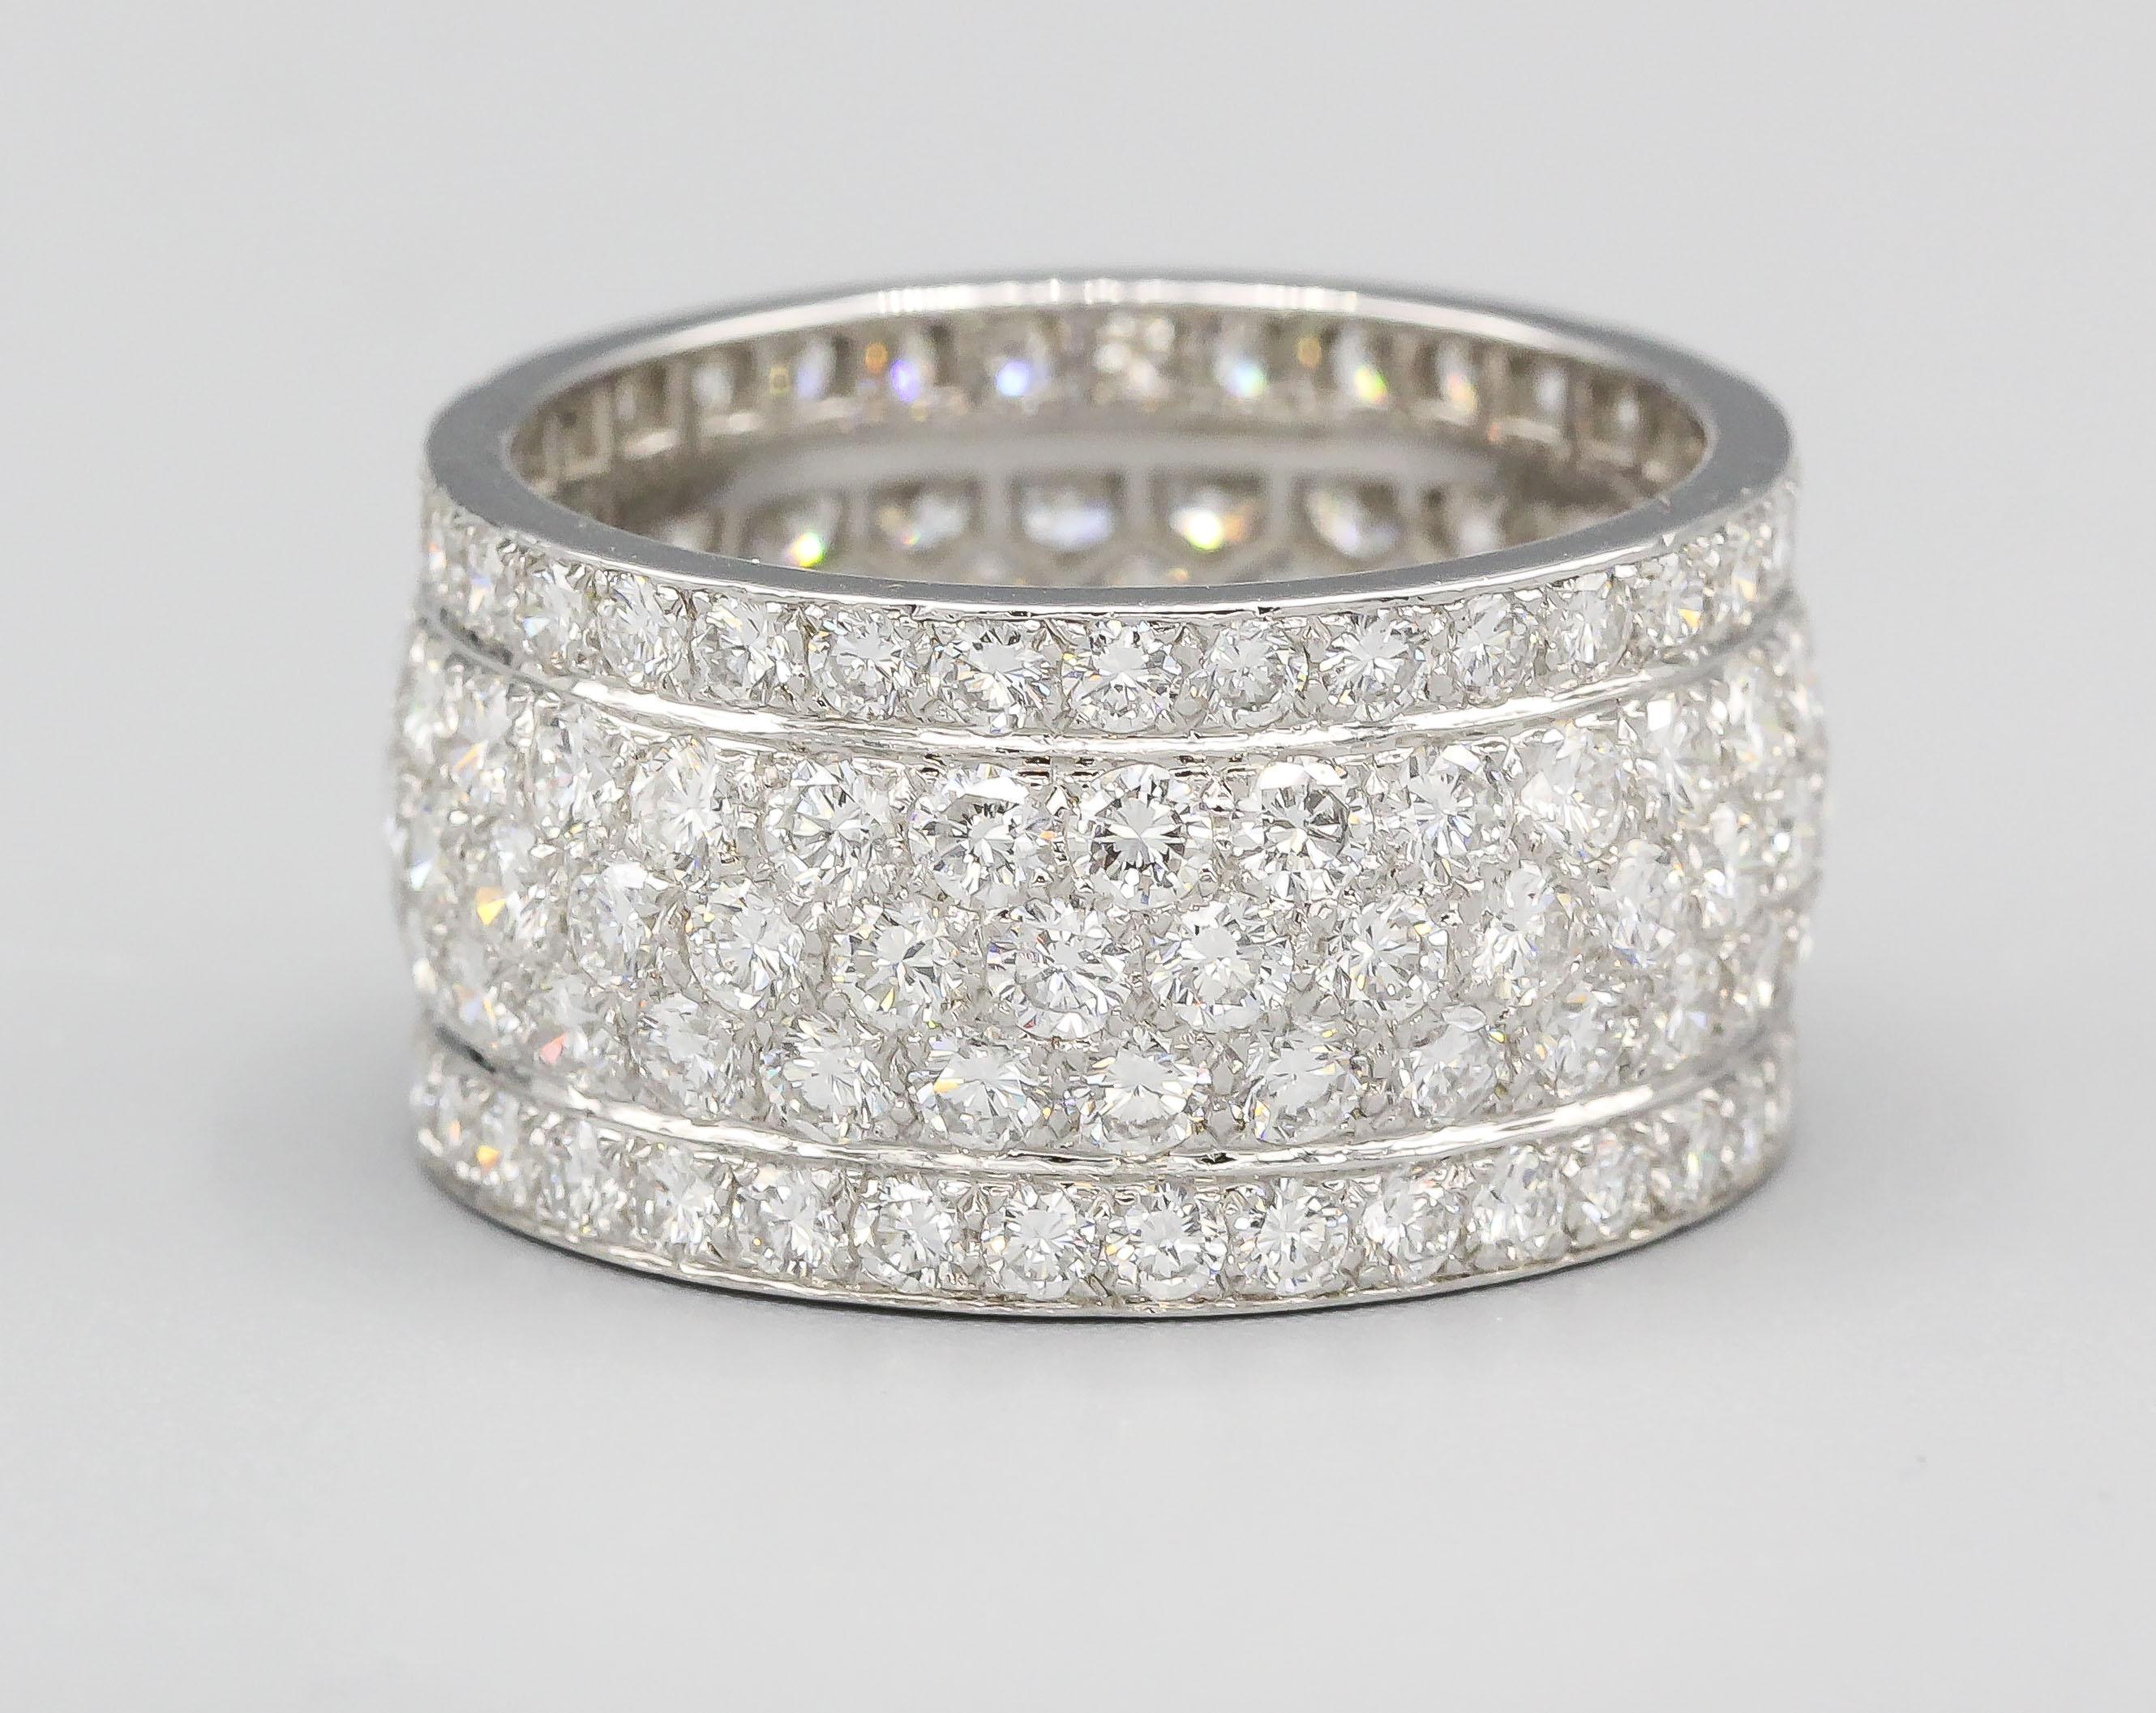 Indulge in the epitome of opulence with this fine Cartier 5-row diamond 18 Karat white gold band. This exquisite piece is a tribute to Cartier's commitment to craftsmanship, luxury, and cultural influence.  Crafted in the finest 18 karat white gold,